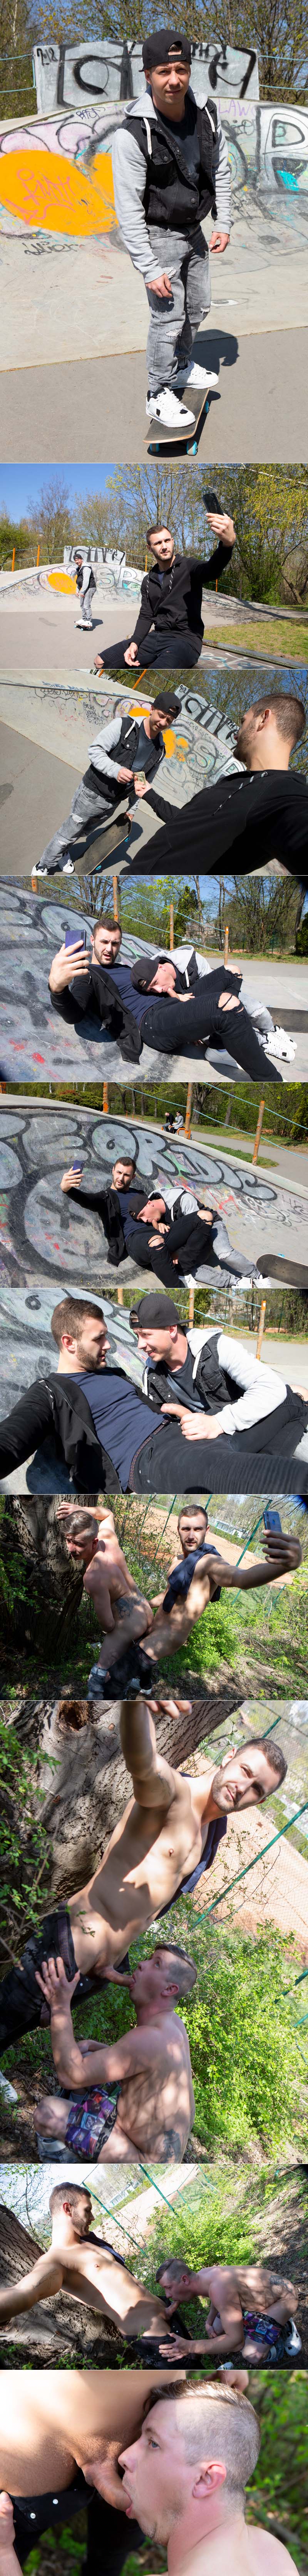 Dudes In Public 49: Skate Park (with Vito and Ryu)